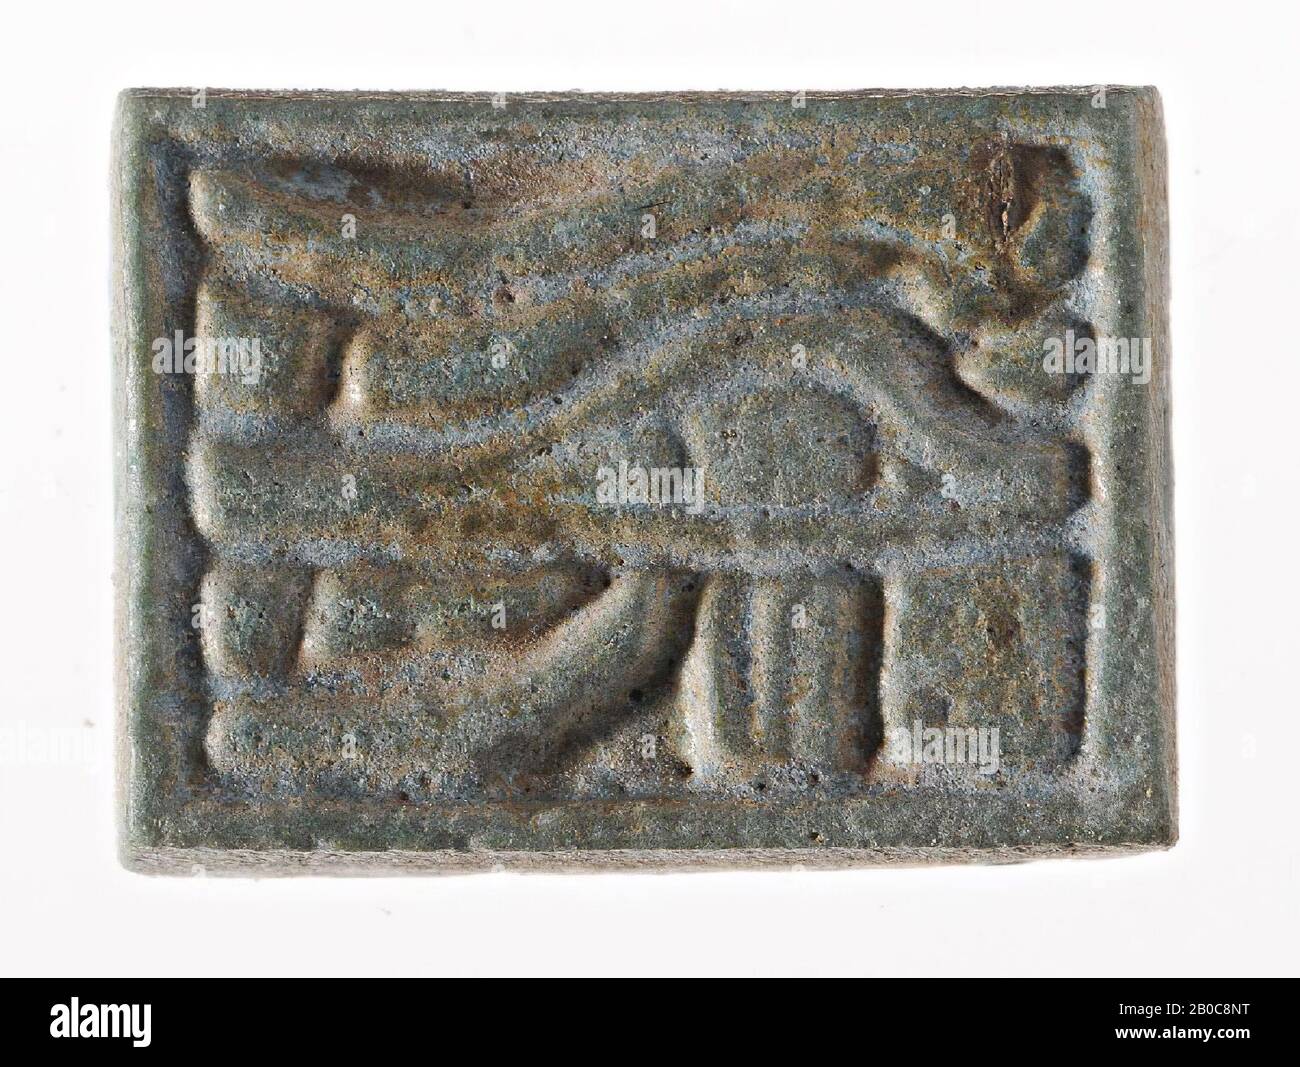 plaque, wedjatoog, Isis, New Year's wish, seal, plaque, faience, 2.2 x 1.6 cm, Egypt Stock Photo